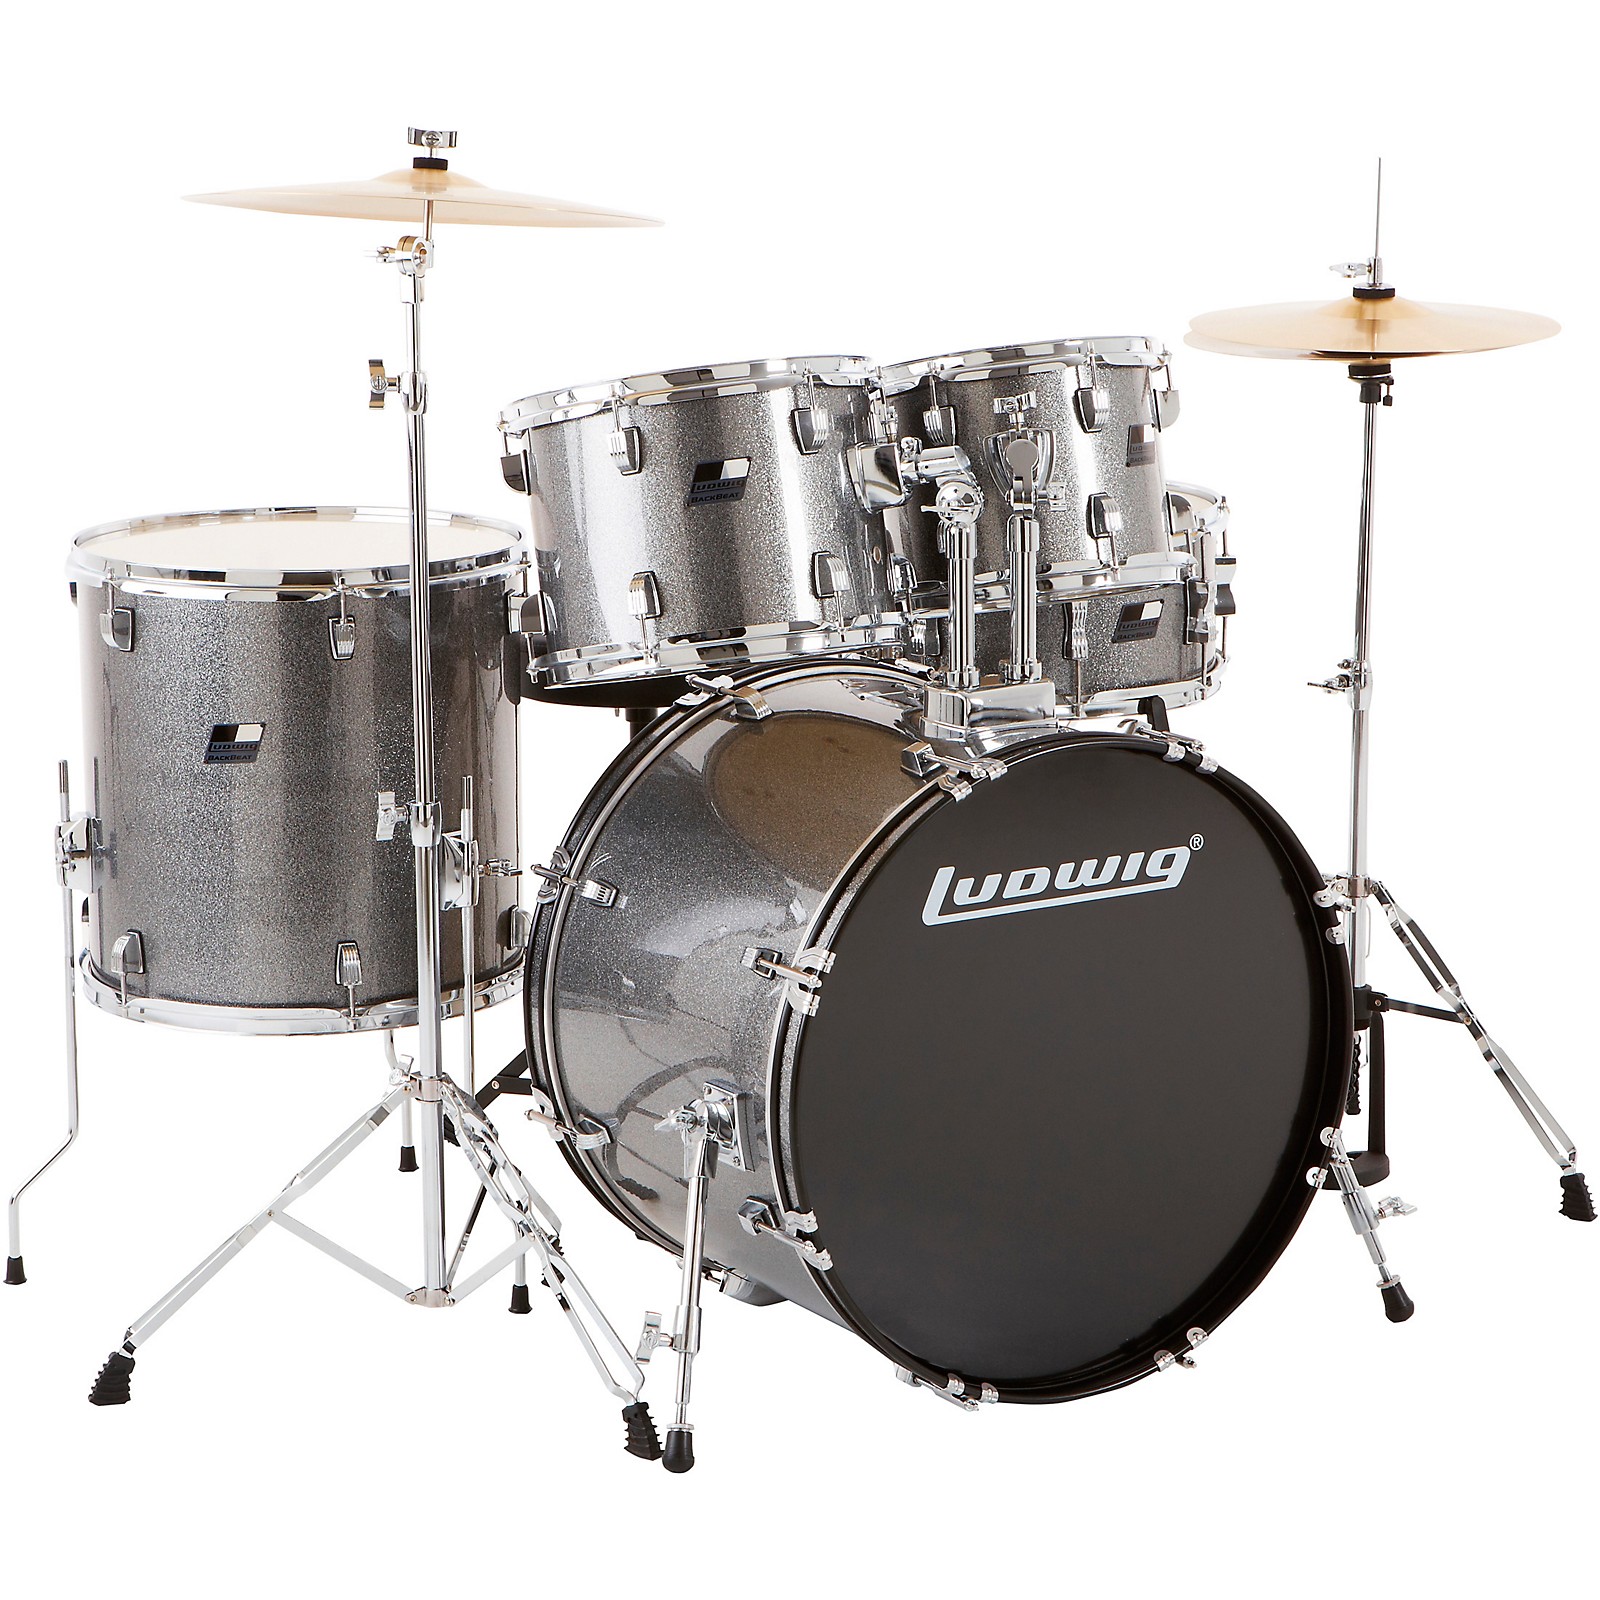 groove percussion drum set assembly instructions